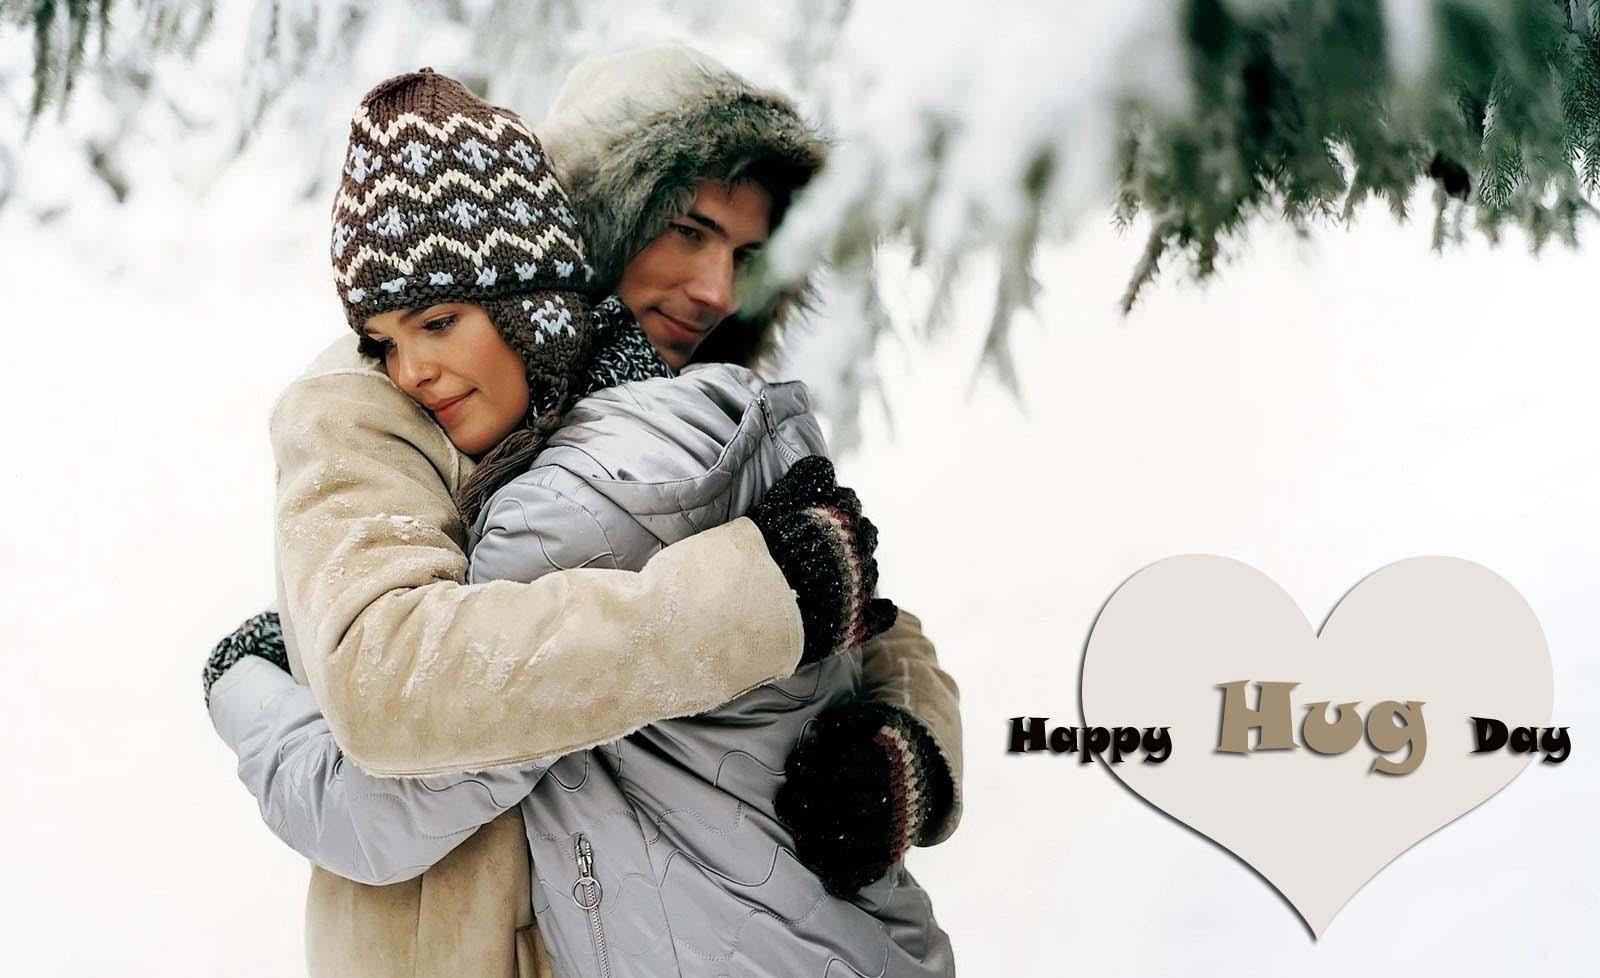 Love Cute Couple Wishes Hug Day Wallpaper 1600×978